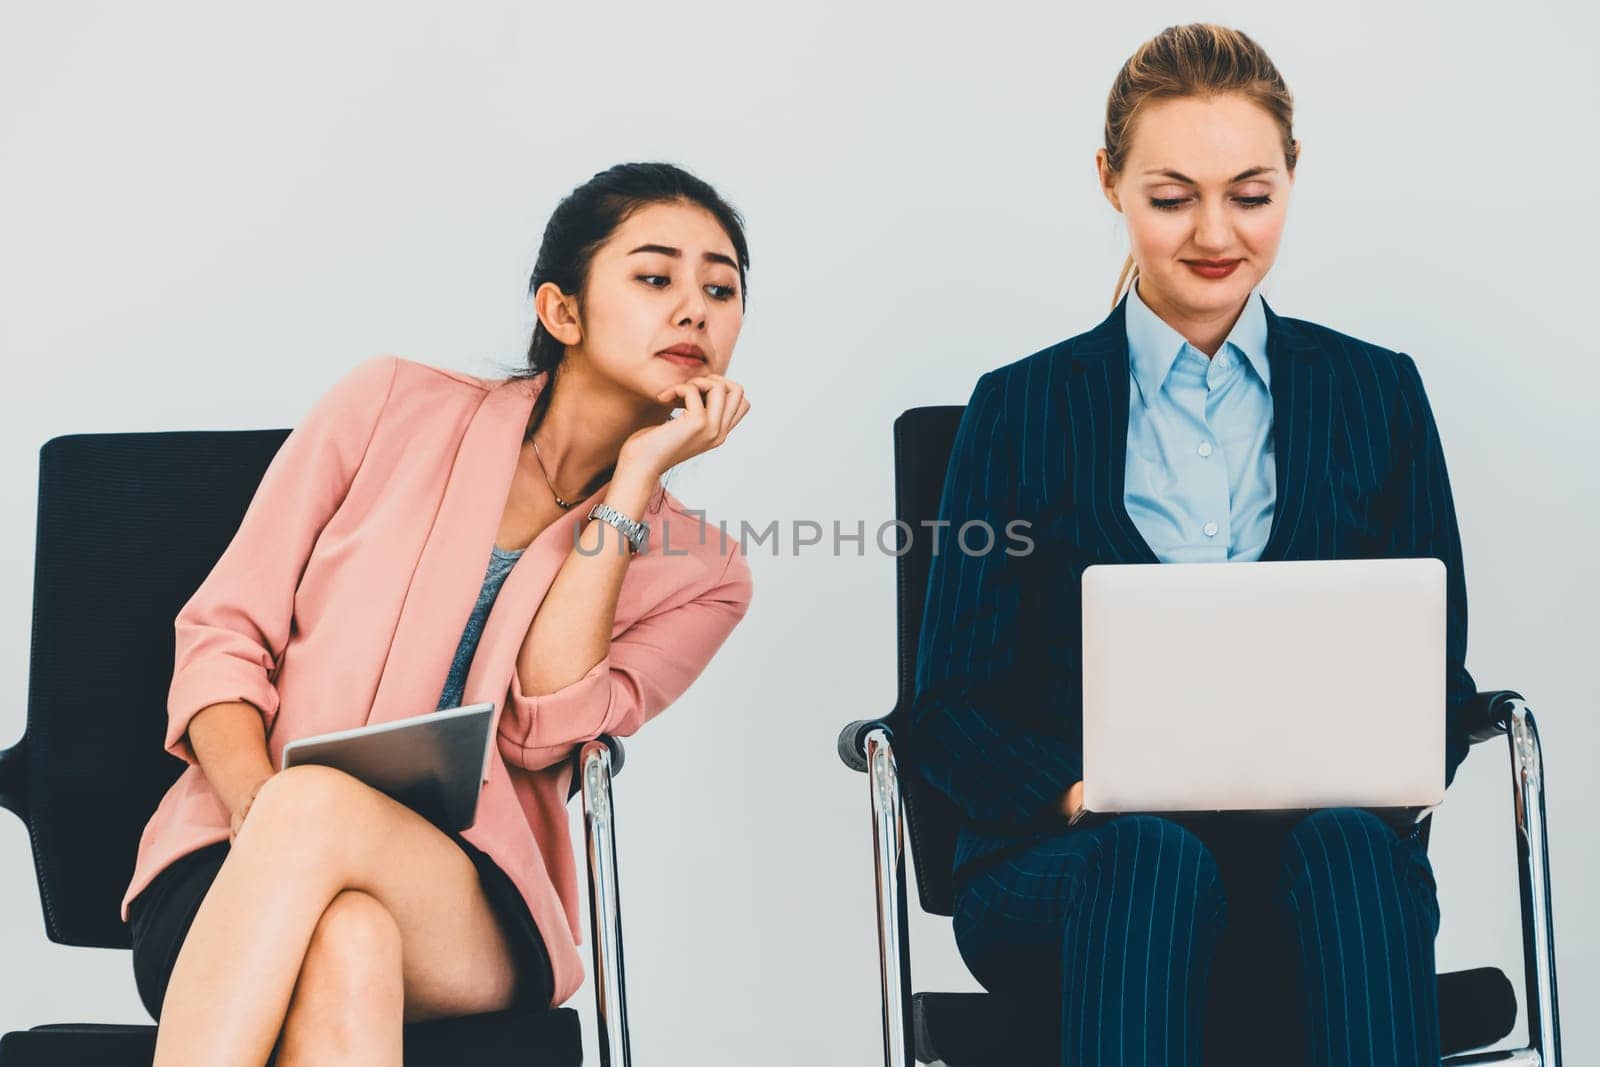 Curious businesswoman looking at the screen of laptop computer of another businesswoman spying stealing idea and copying private information from coworker at workplace. Plagiarism concept. uds